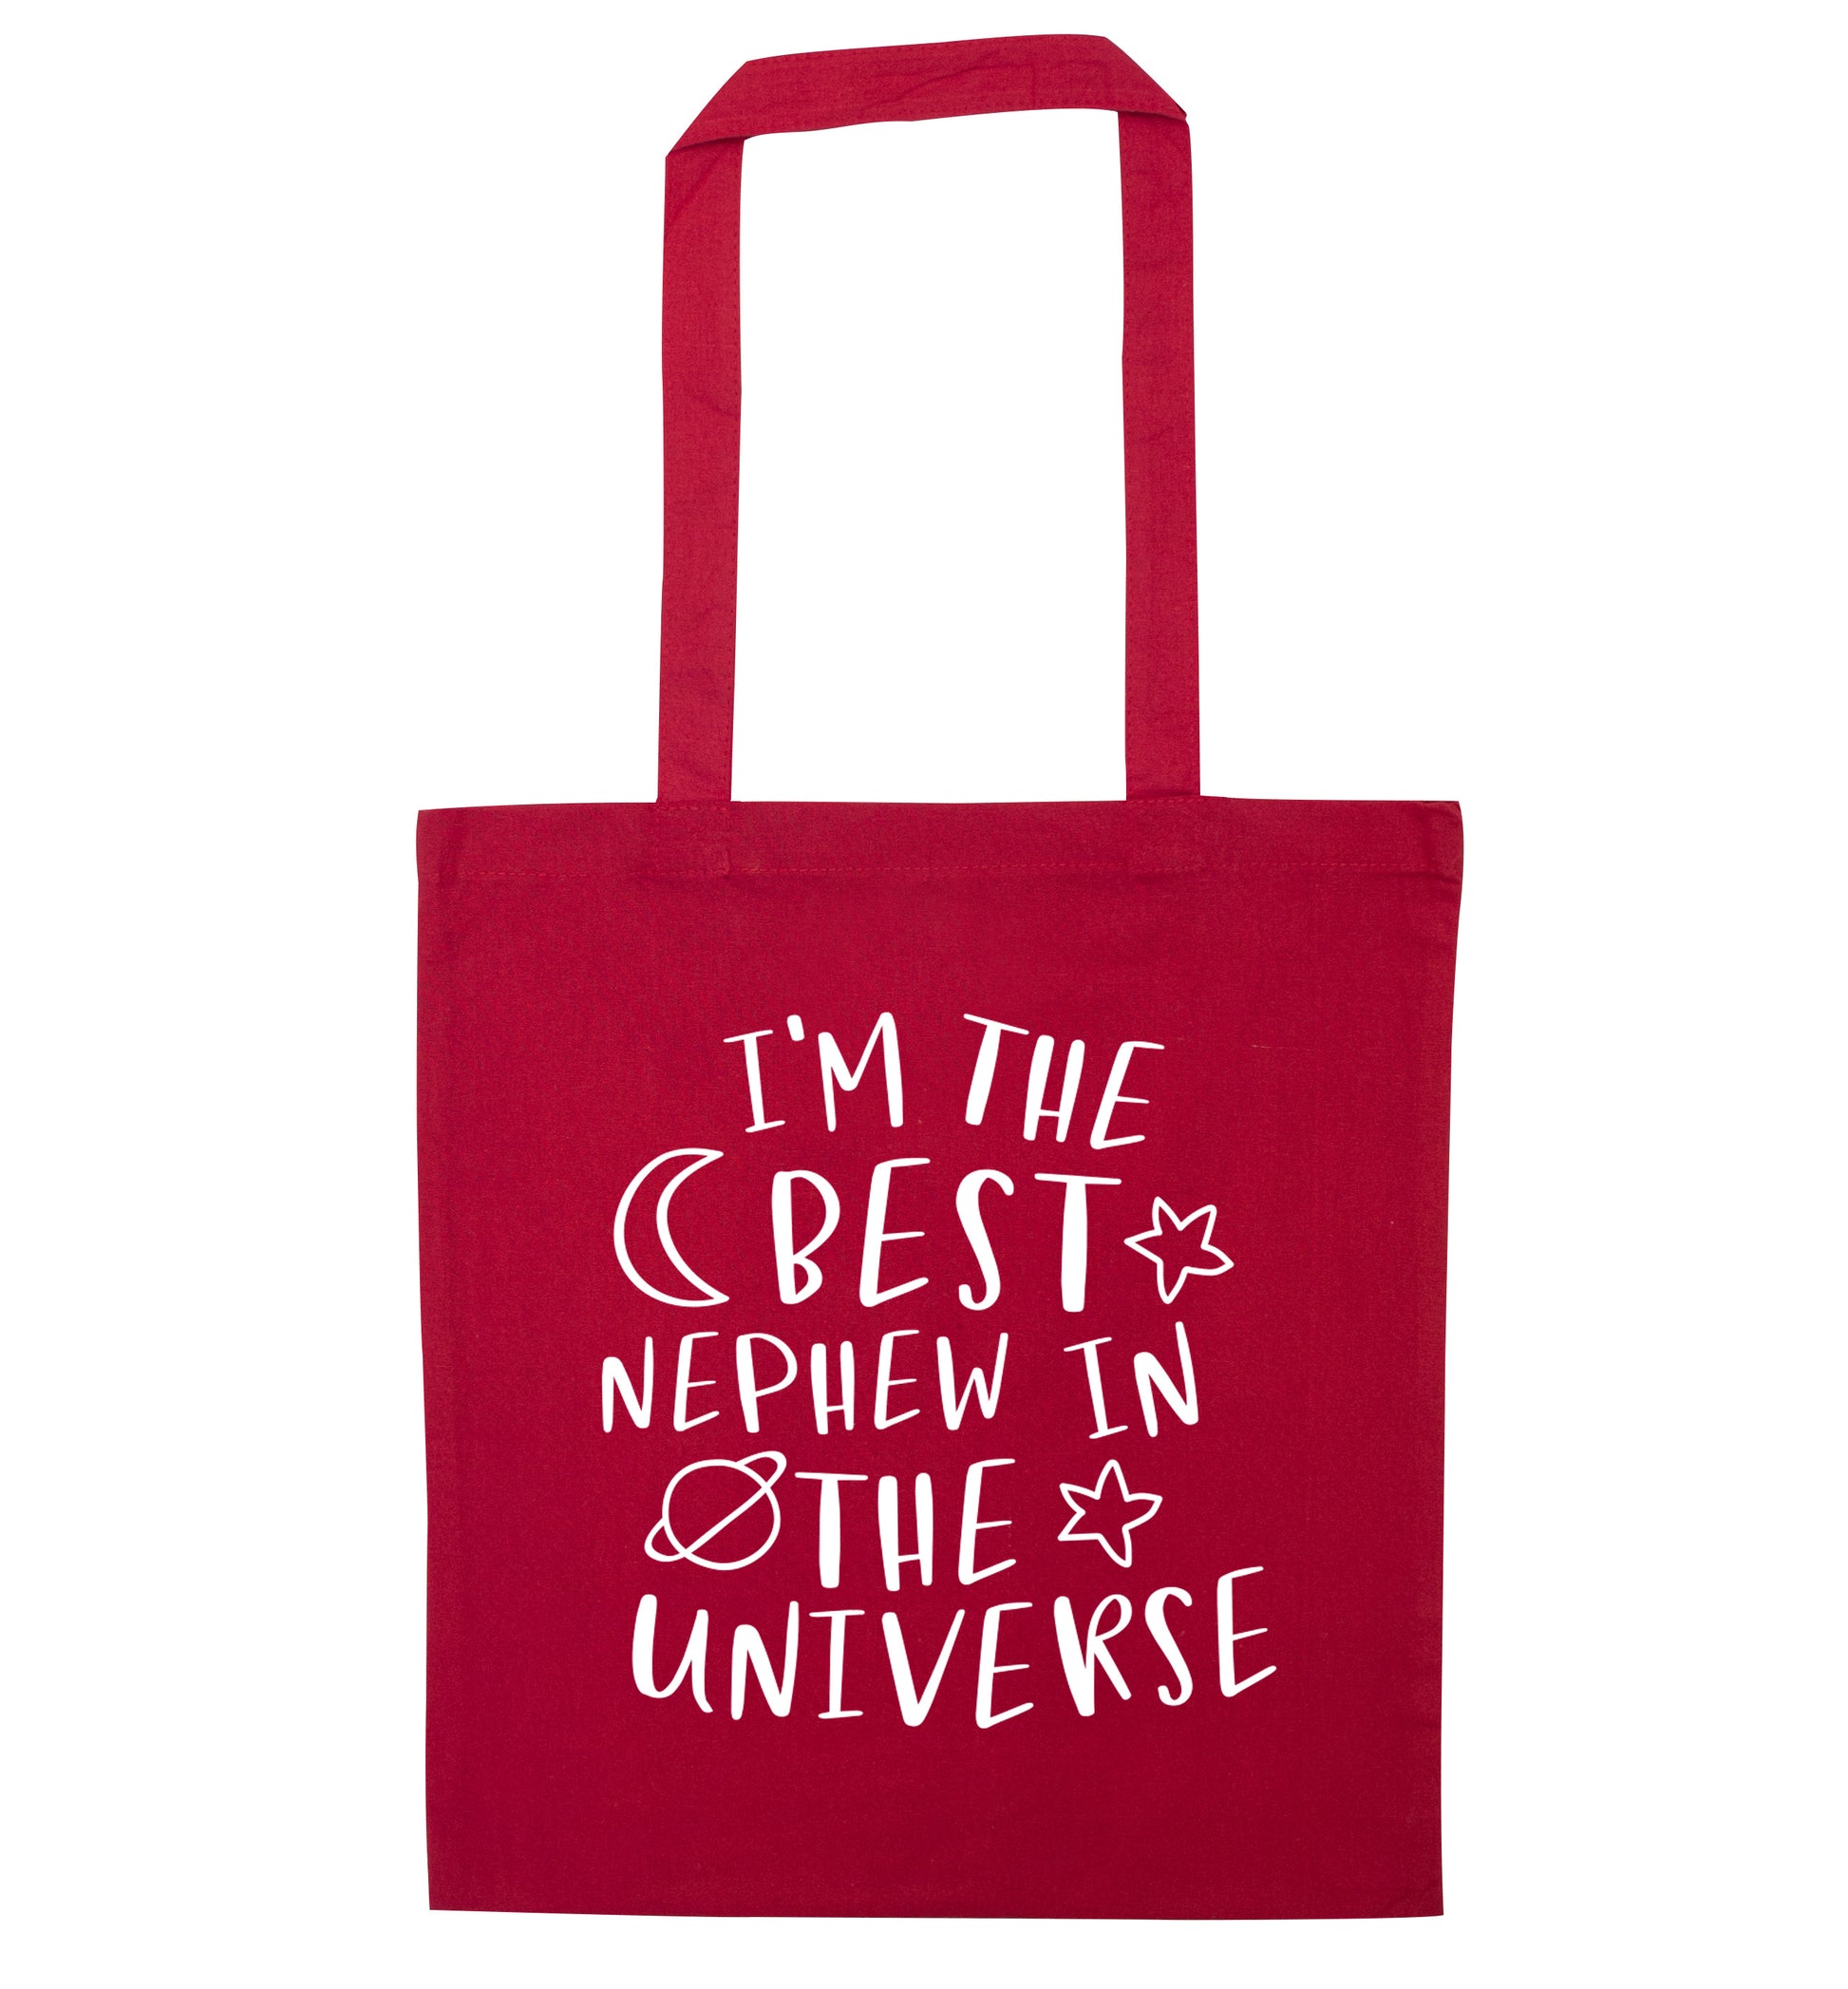 I'm the best nephew in the universe red tote bag